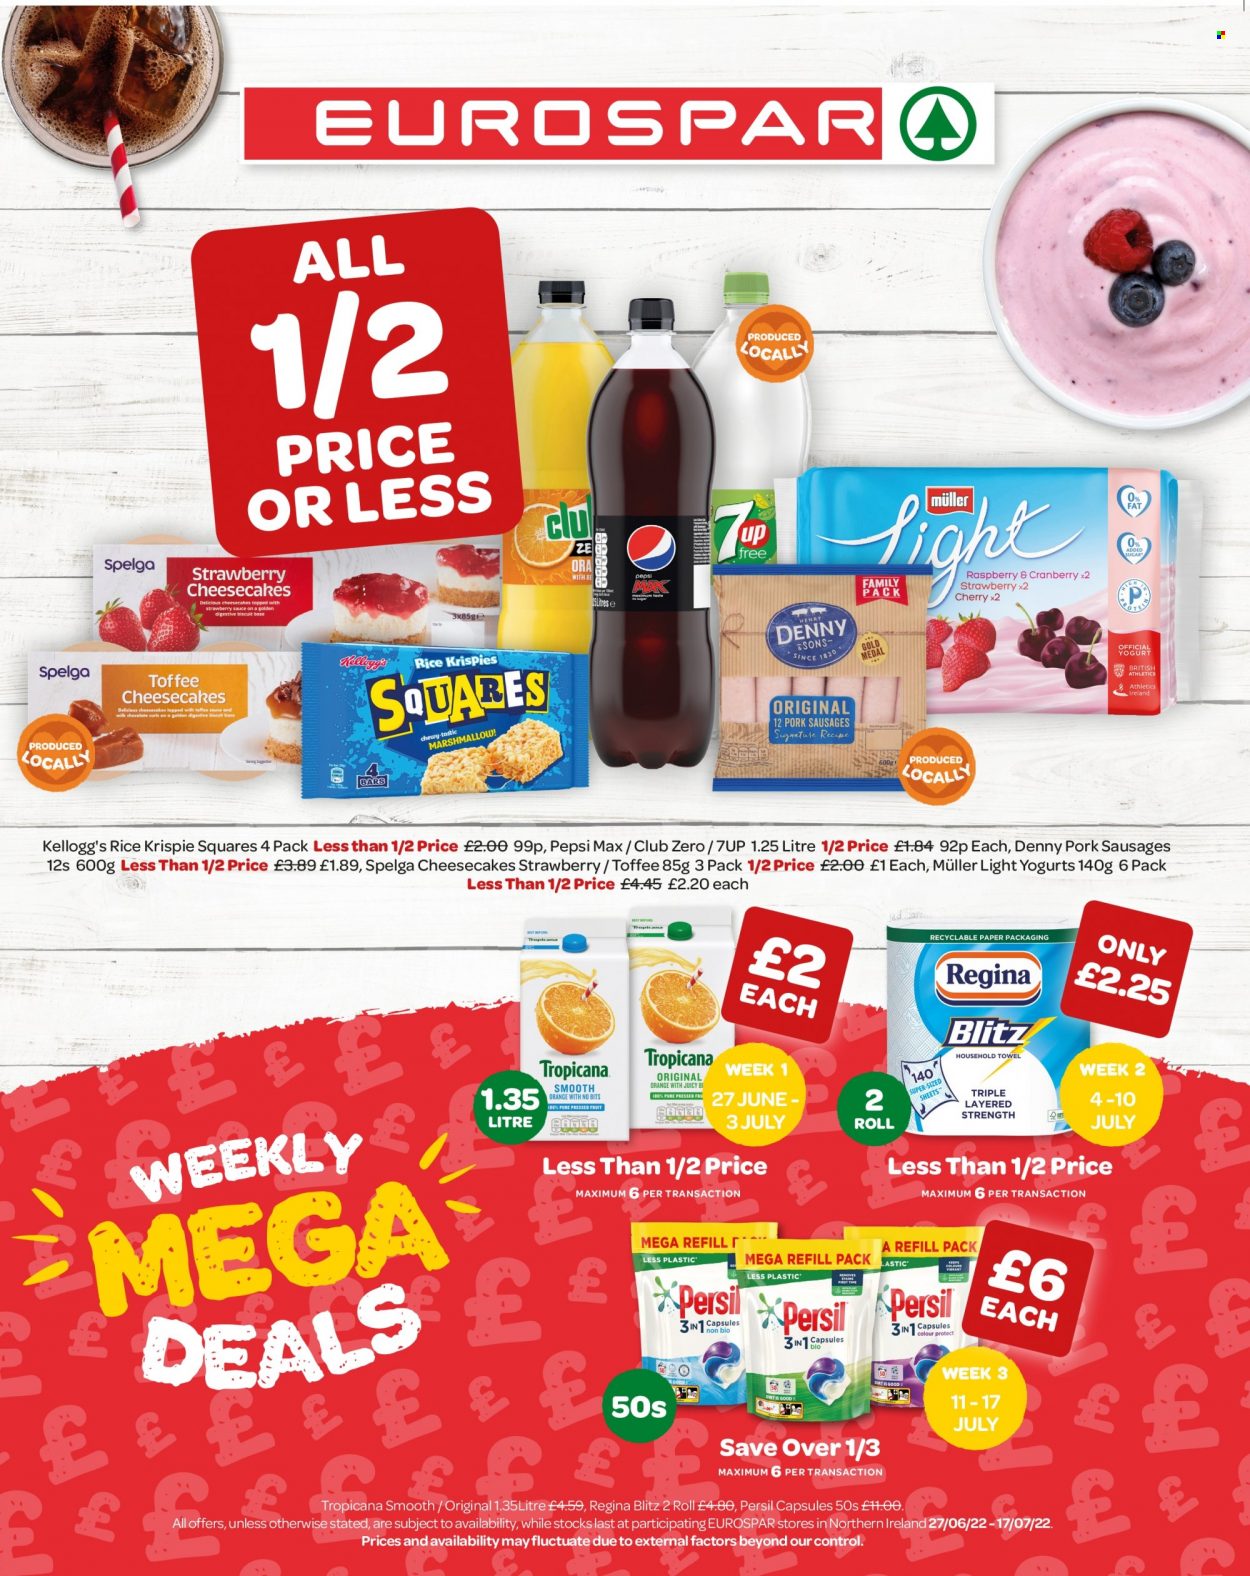 thumbnail - SPAR offer  - 27/06/2022 - 17/07/2022 - Sales products - pineapple, pears, cake, brownies, sausage, Oreo, Müller, Yoplait, Ben & Jerry's, fudge, chocolate, Snickers, Twix, Bounty, Mars, Cadbury, toffee, Kellogg's, Tayto, rice, caramel, oil, Pepsi, Pepsi Max, 7UP, Club Zero, smoothie, baby powder, Kleenex, Rex, Febreze, Fairy, Persil, Surf, body wash, shampoo, shower gel, L’Oréal, L’Oréal Men, conditioner, VO5, body lotion, anti-perspirant, Sure, animal food, dog food, Winalot, Bakers, dry dog food. Page 1.